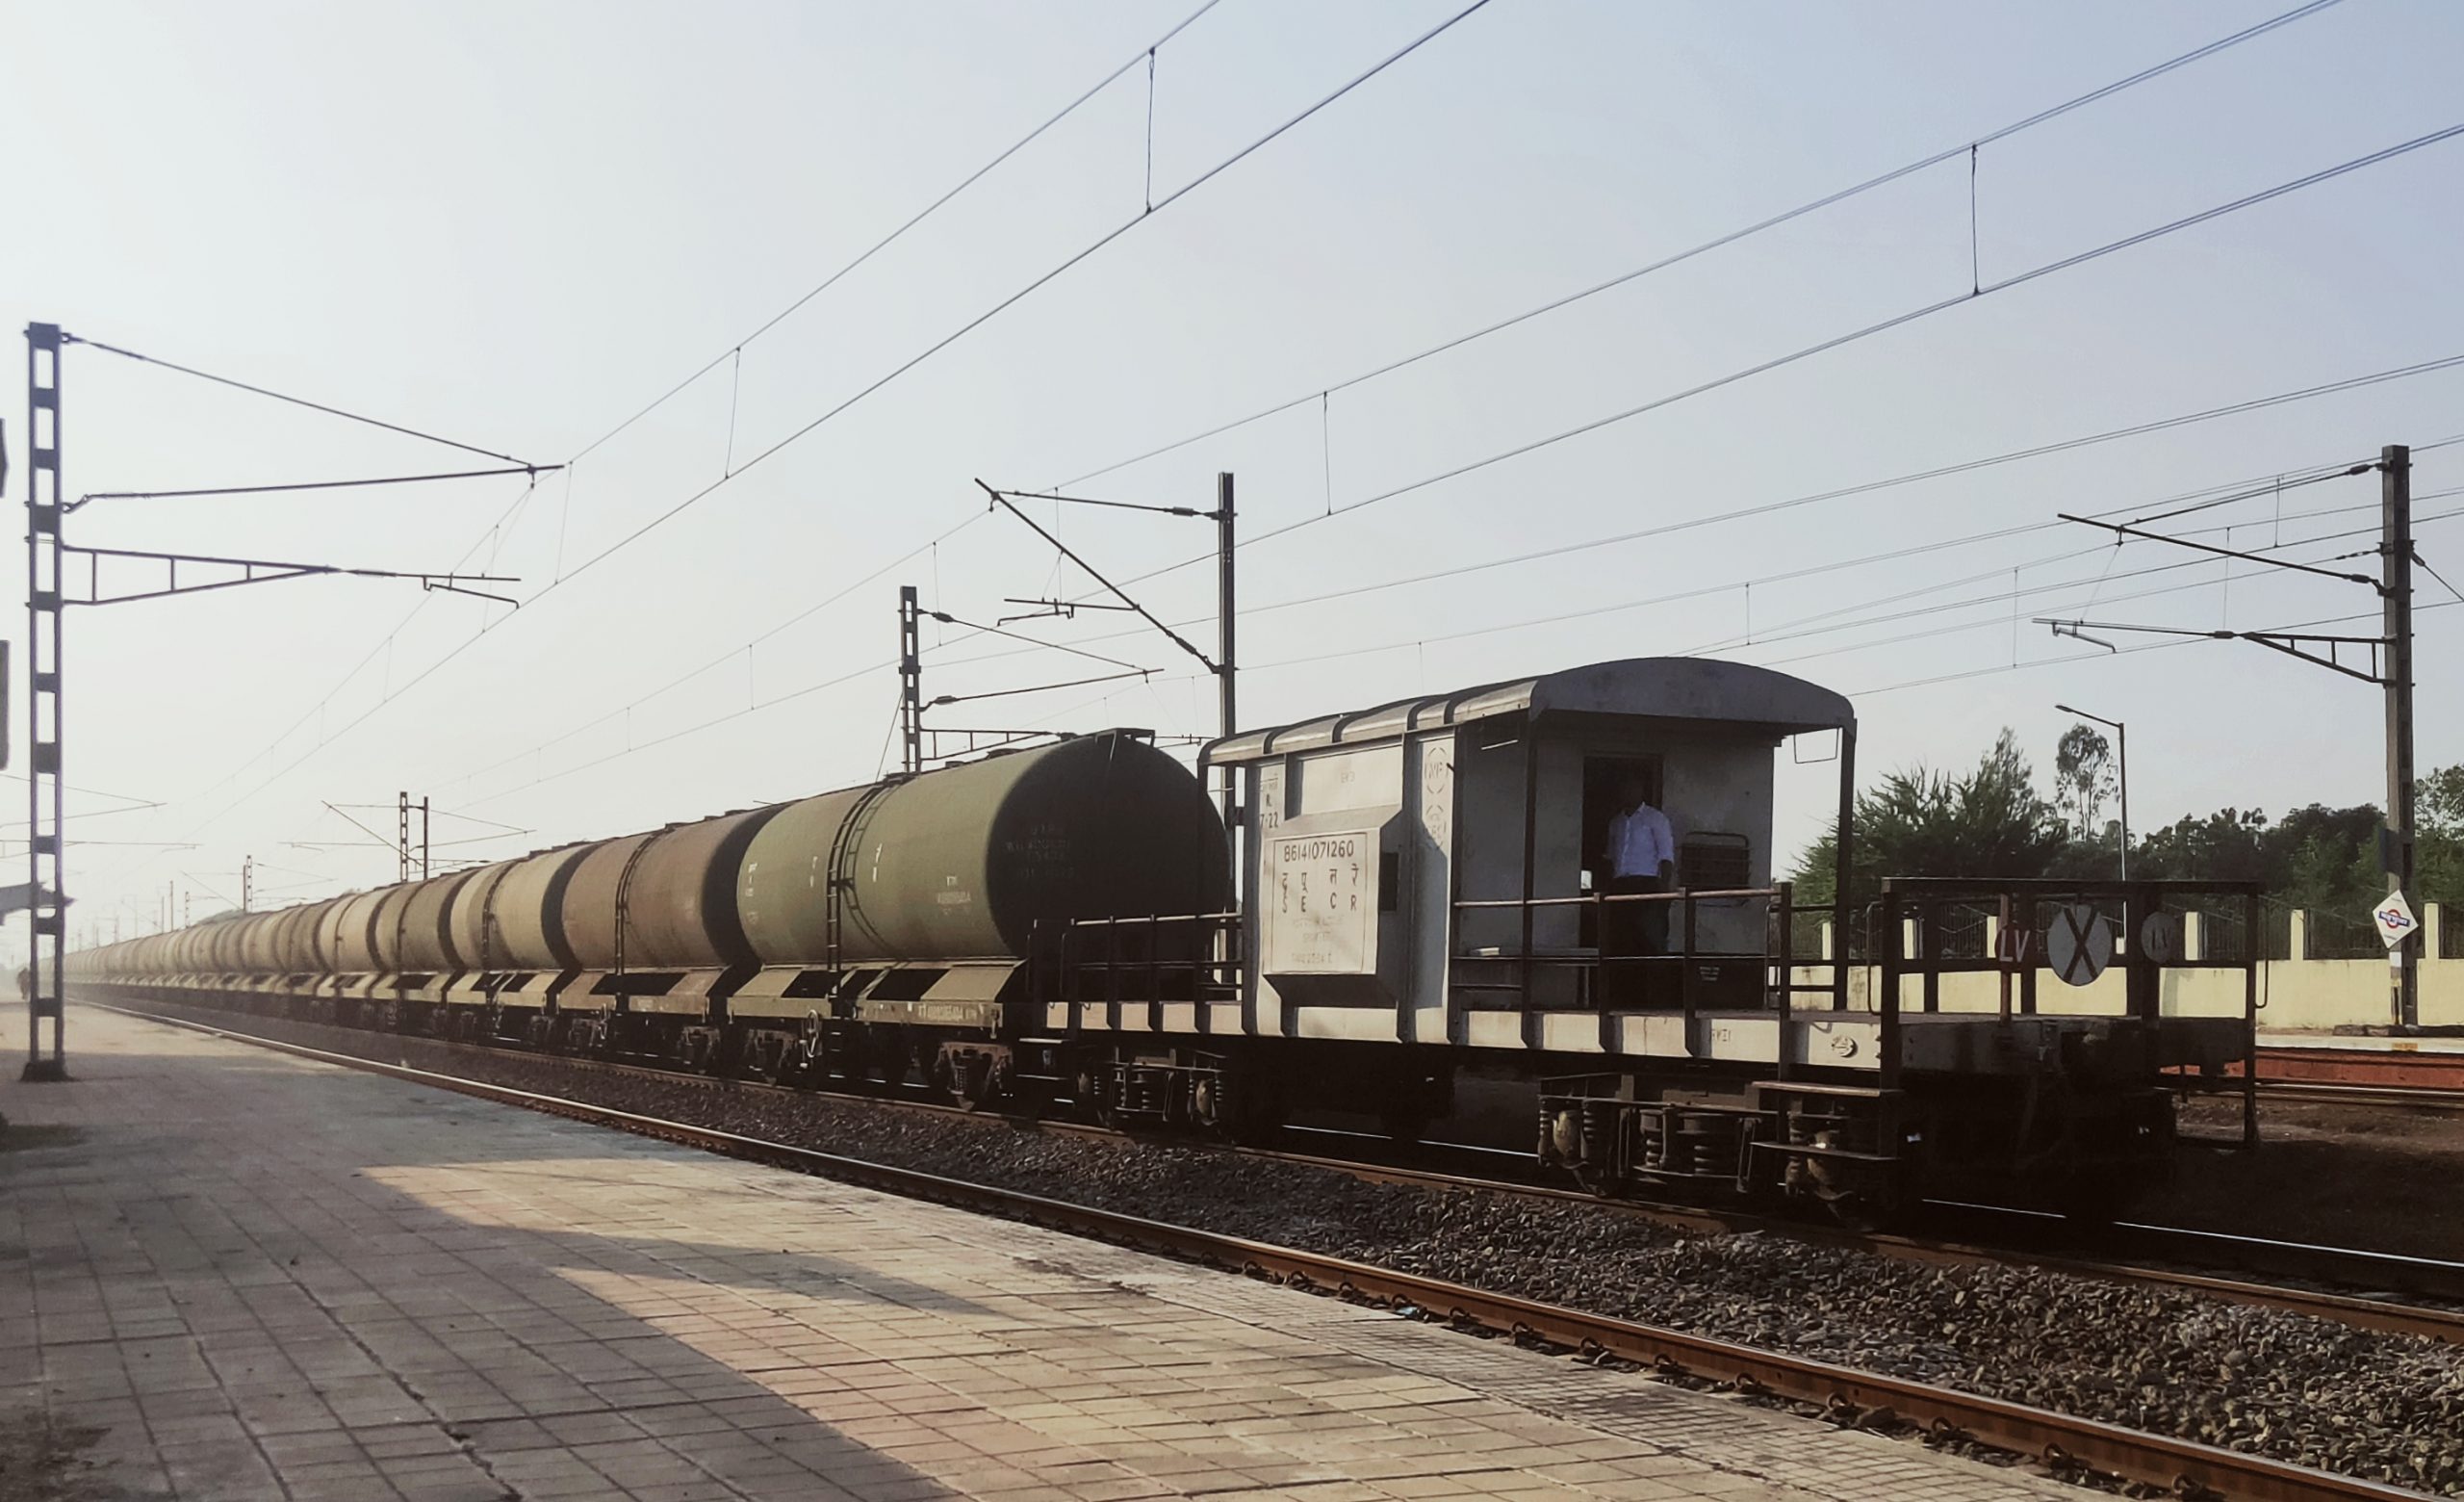 A goods train carrying oil tankers